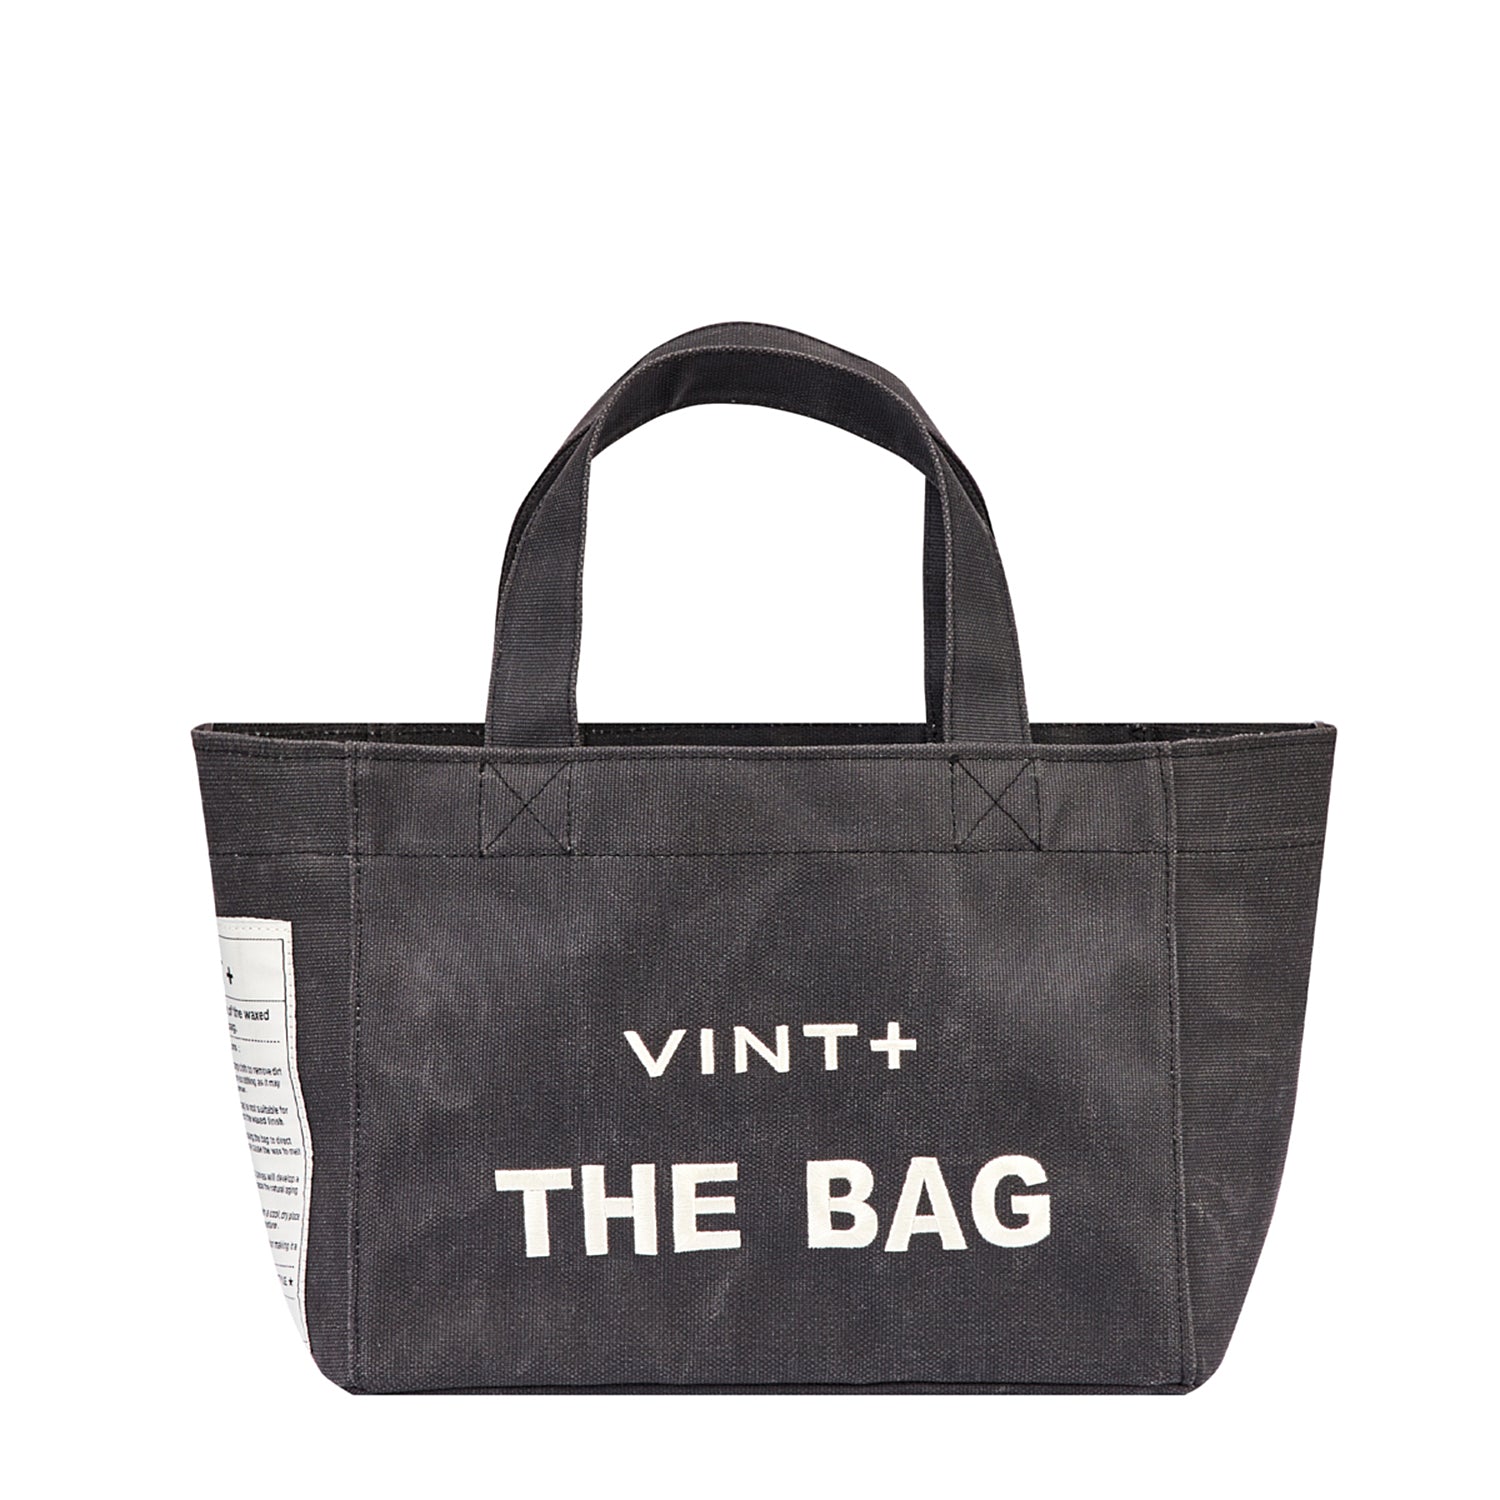 CANVAS BAG - SMALL - ANTHRACITE